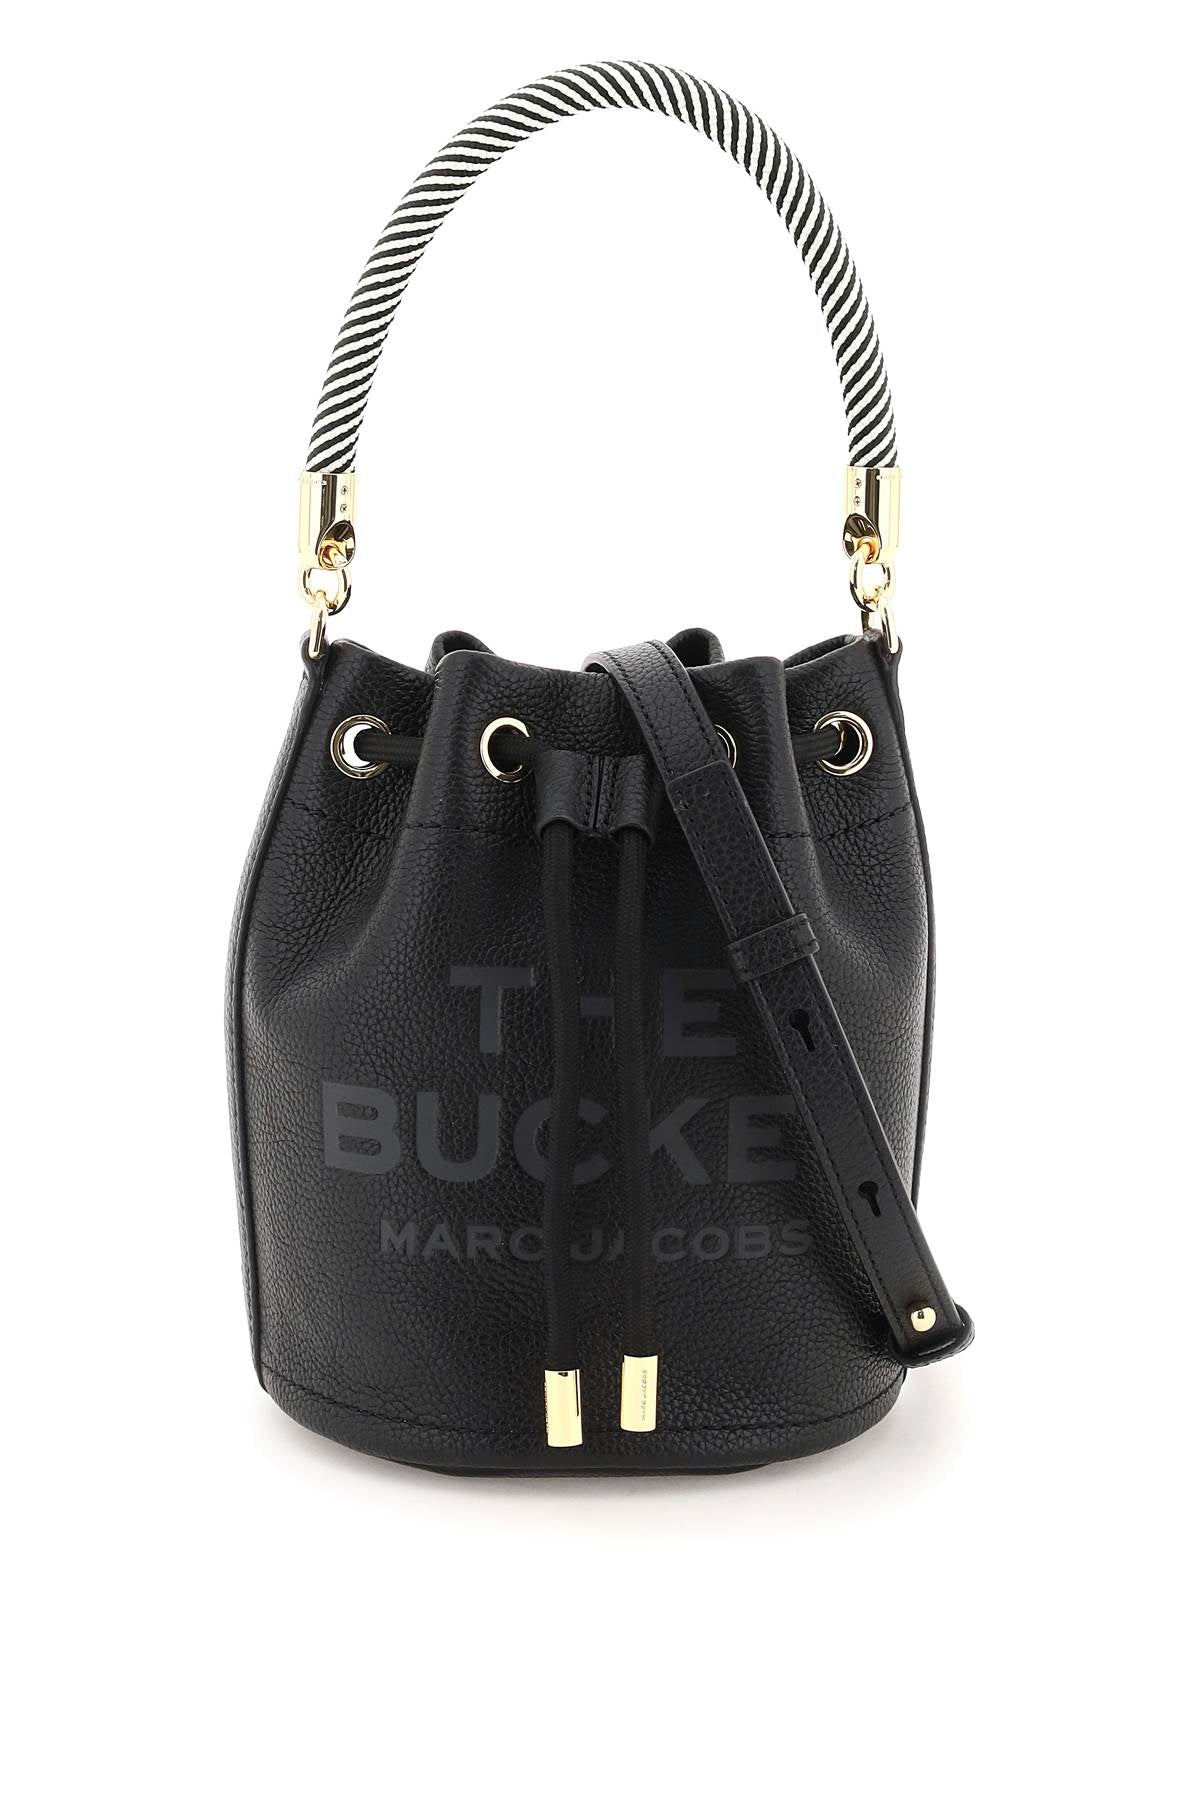 Marc jacobs the leather bucket bag-0